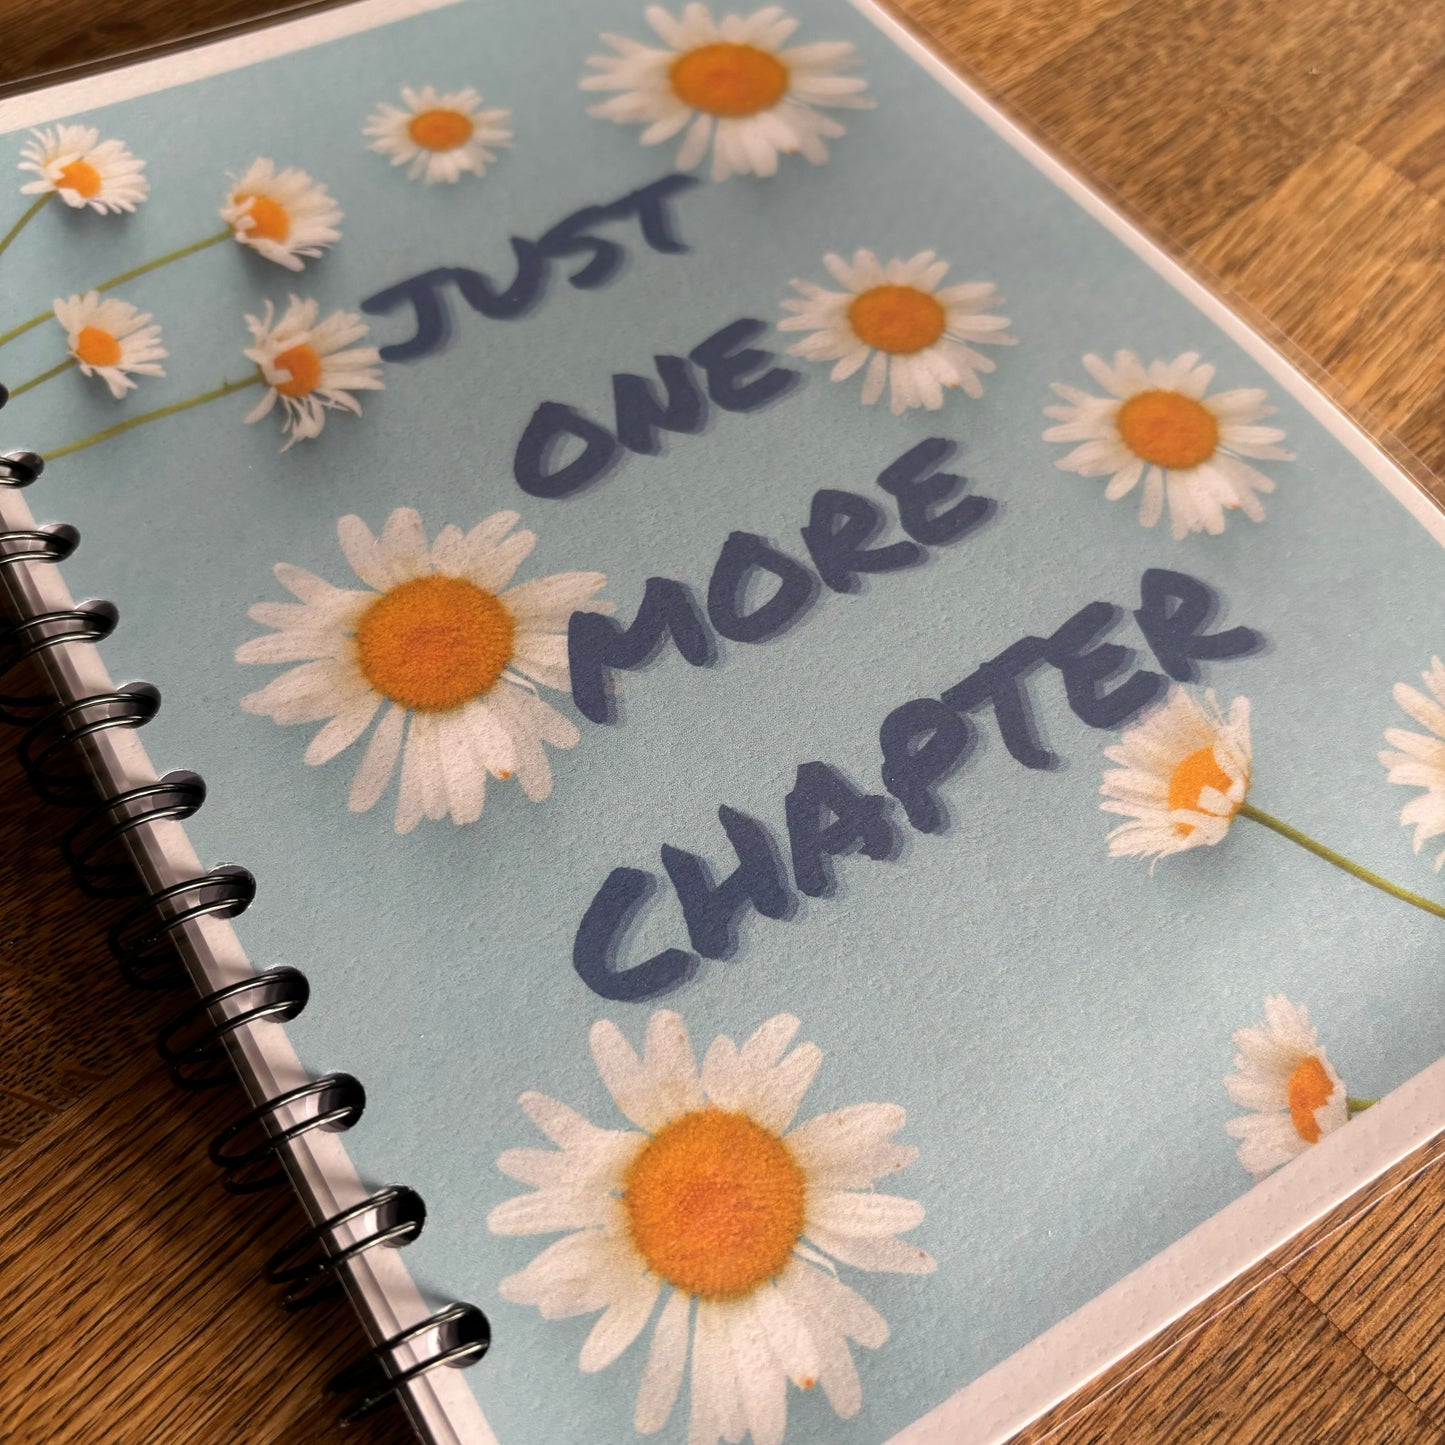 Blue Daisies Reading Journal: TBR, Reading Log, Book Tracker, Book Reviews, Favourite Authors, Quotes And Best Reads.